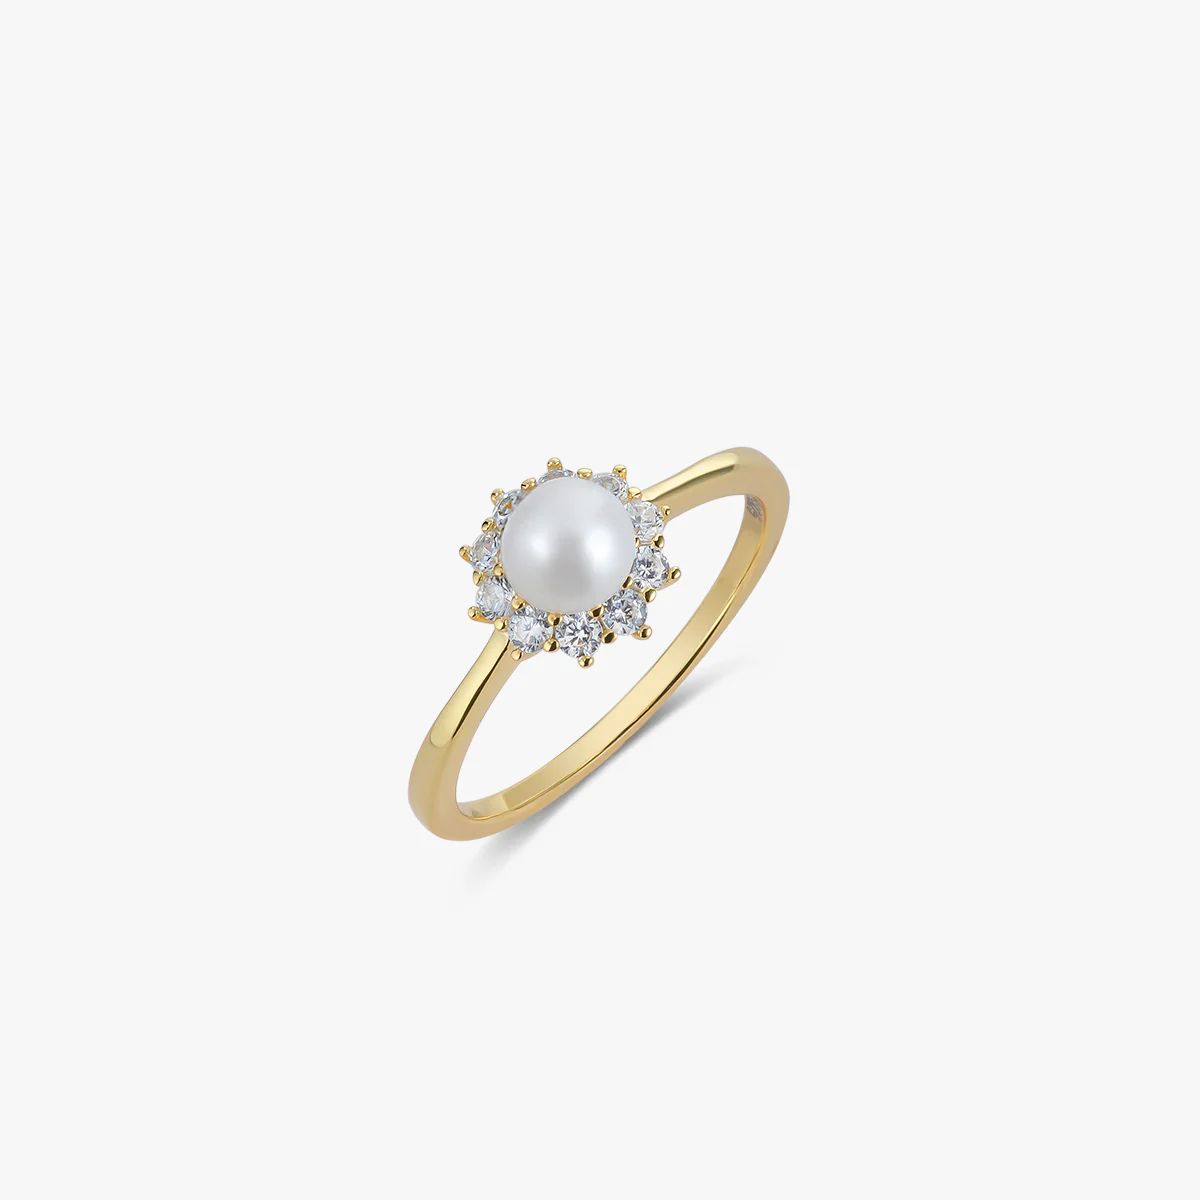 Mya Pearl Ring with Halo | Victoria Emerson